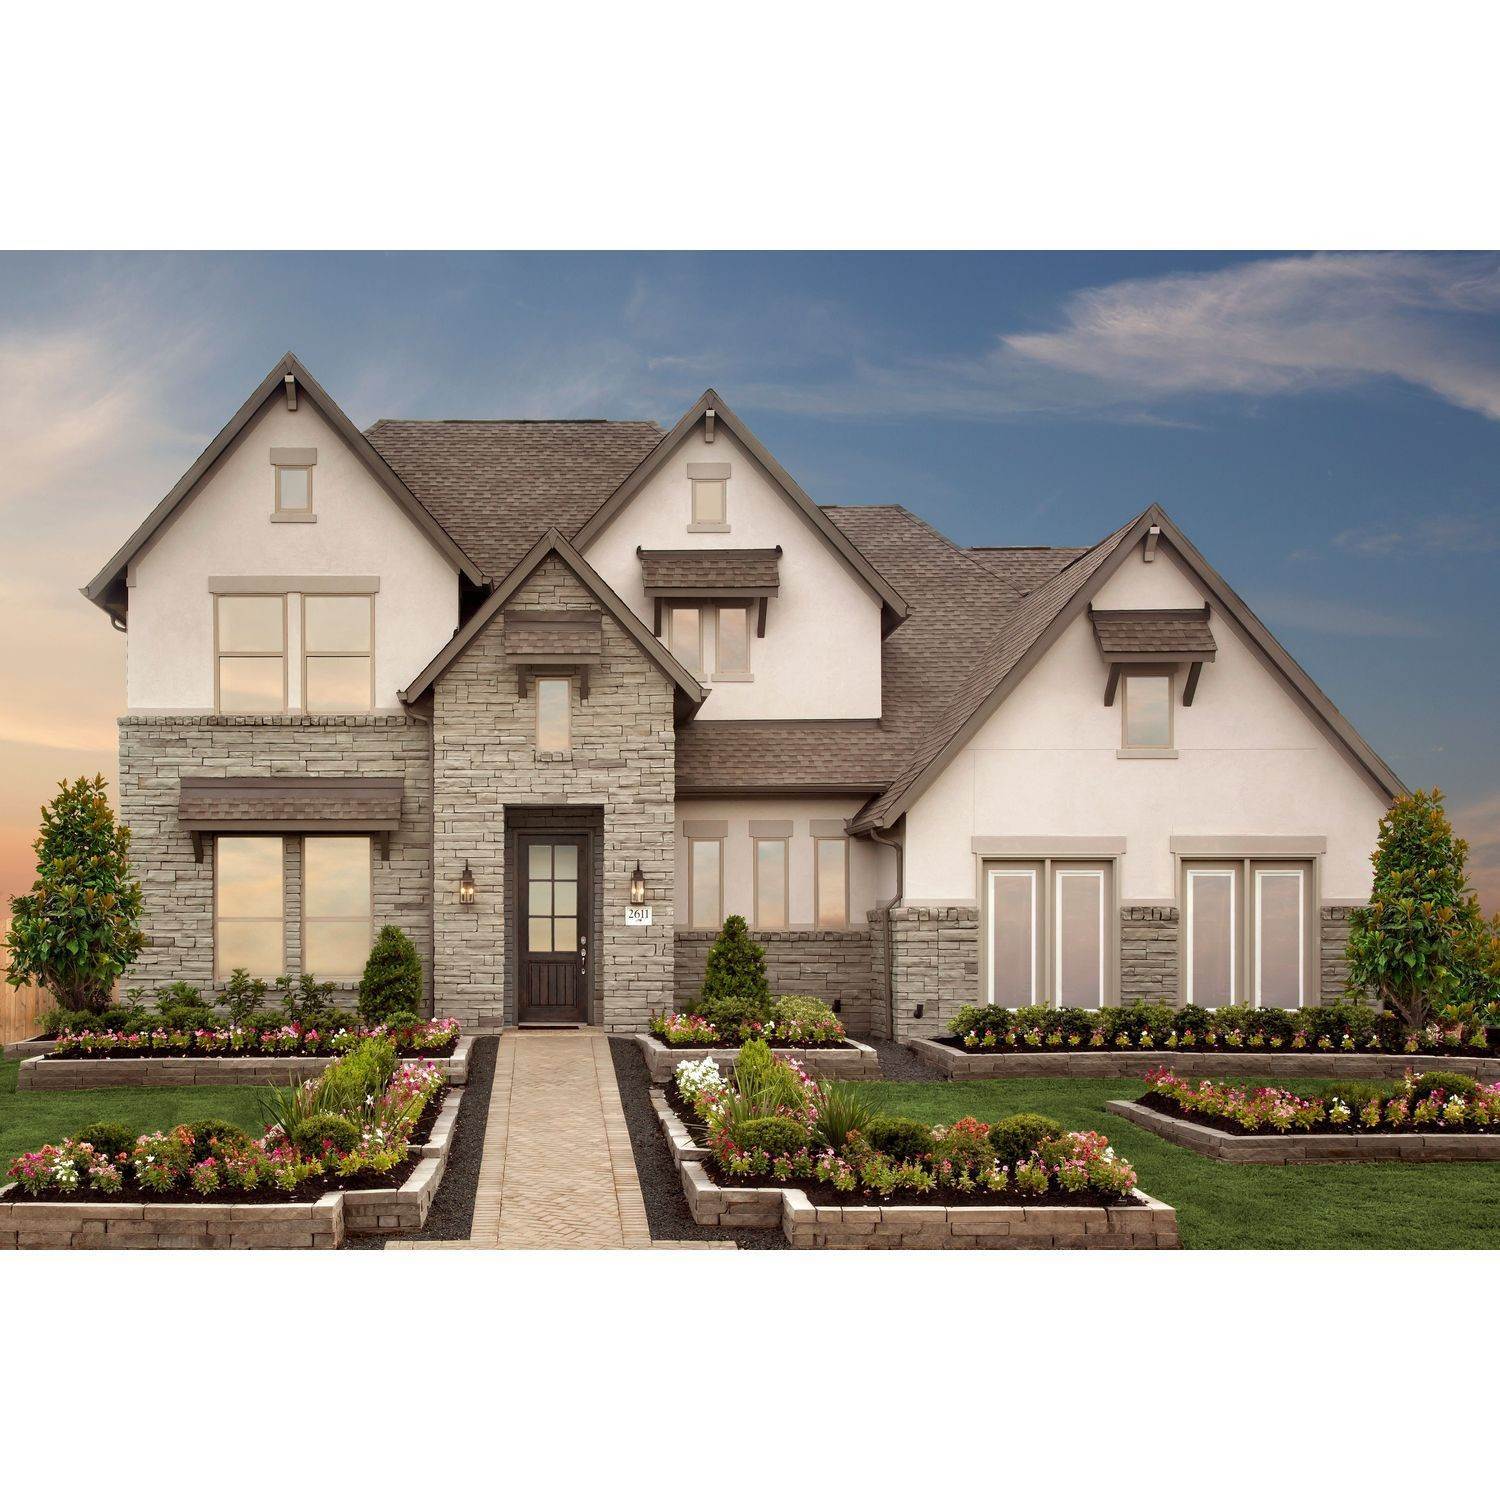 The Meadows at Imperial Oaks 60' & 70' building at 2611 Oakland Park Lane, Conroe, TX 77385